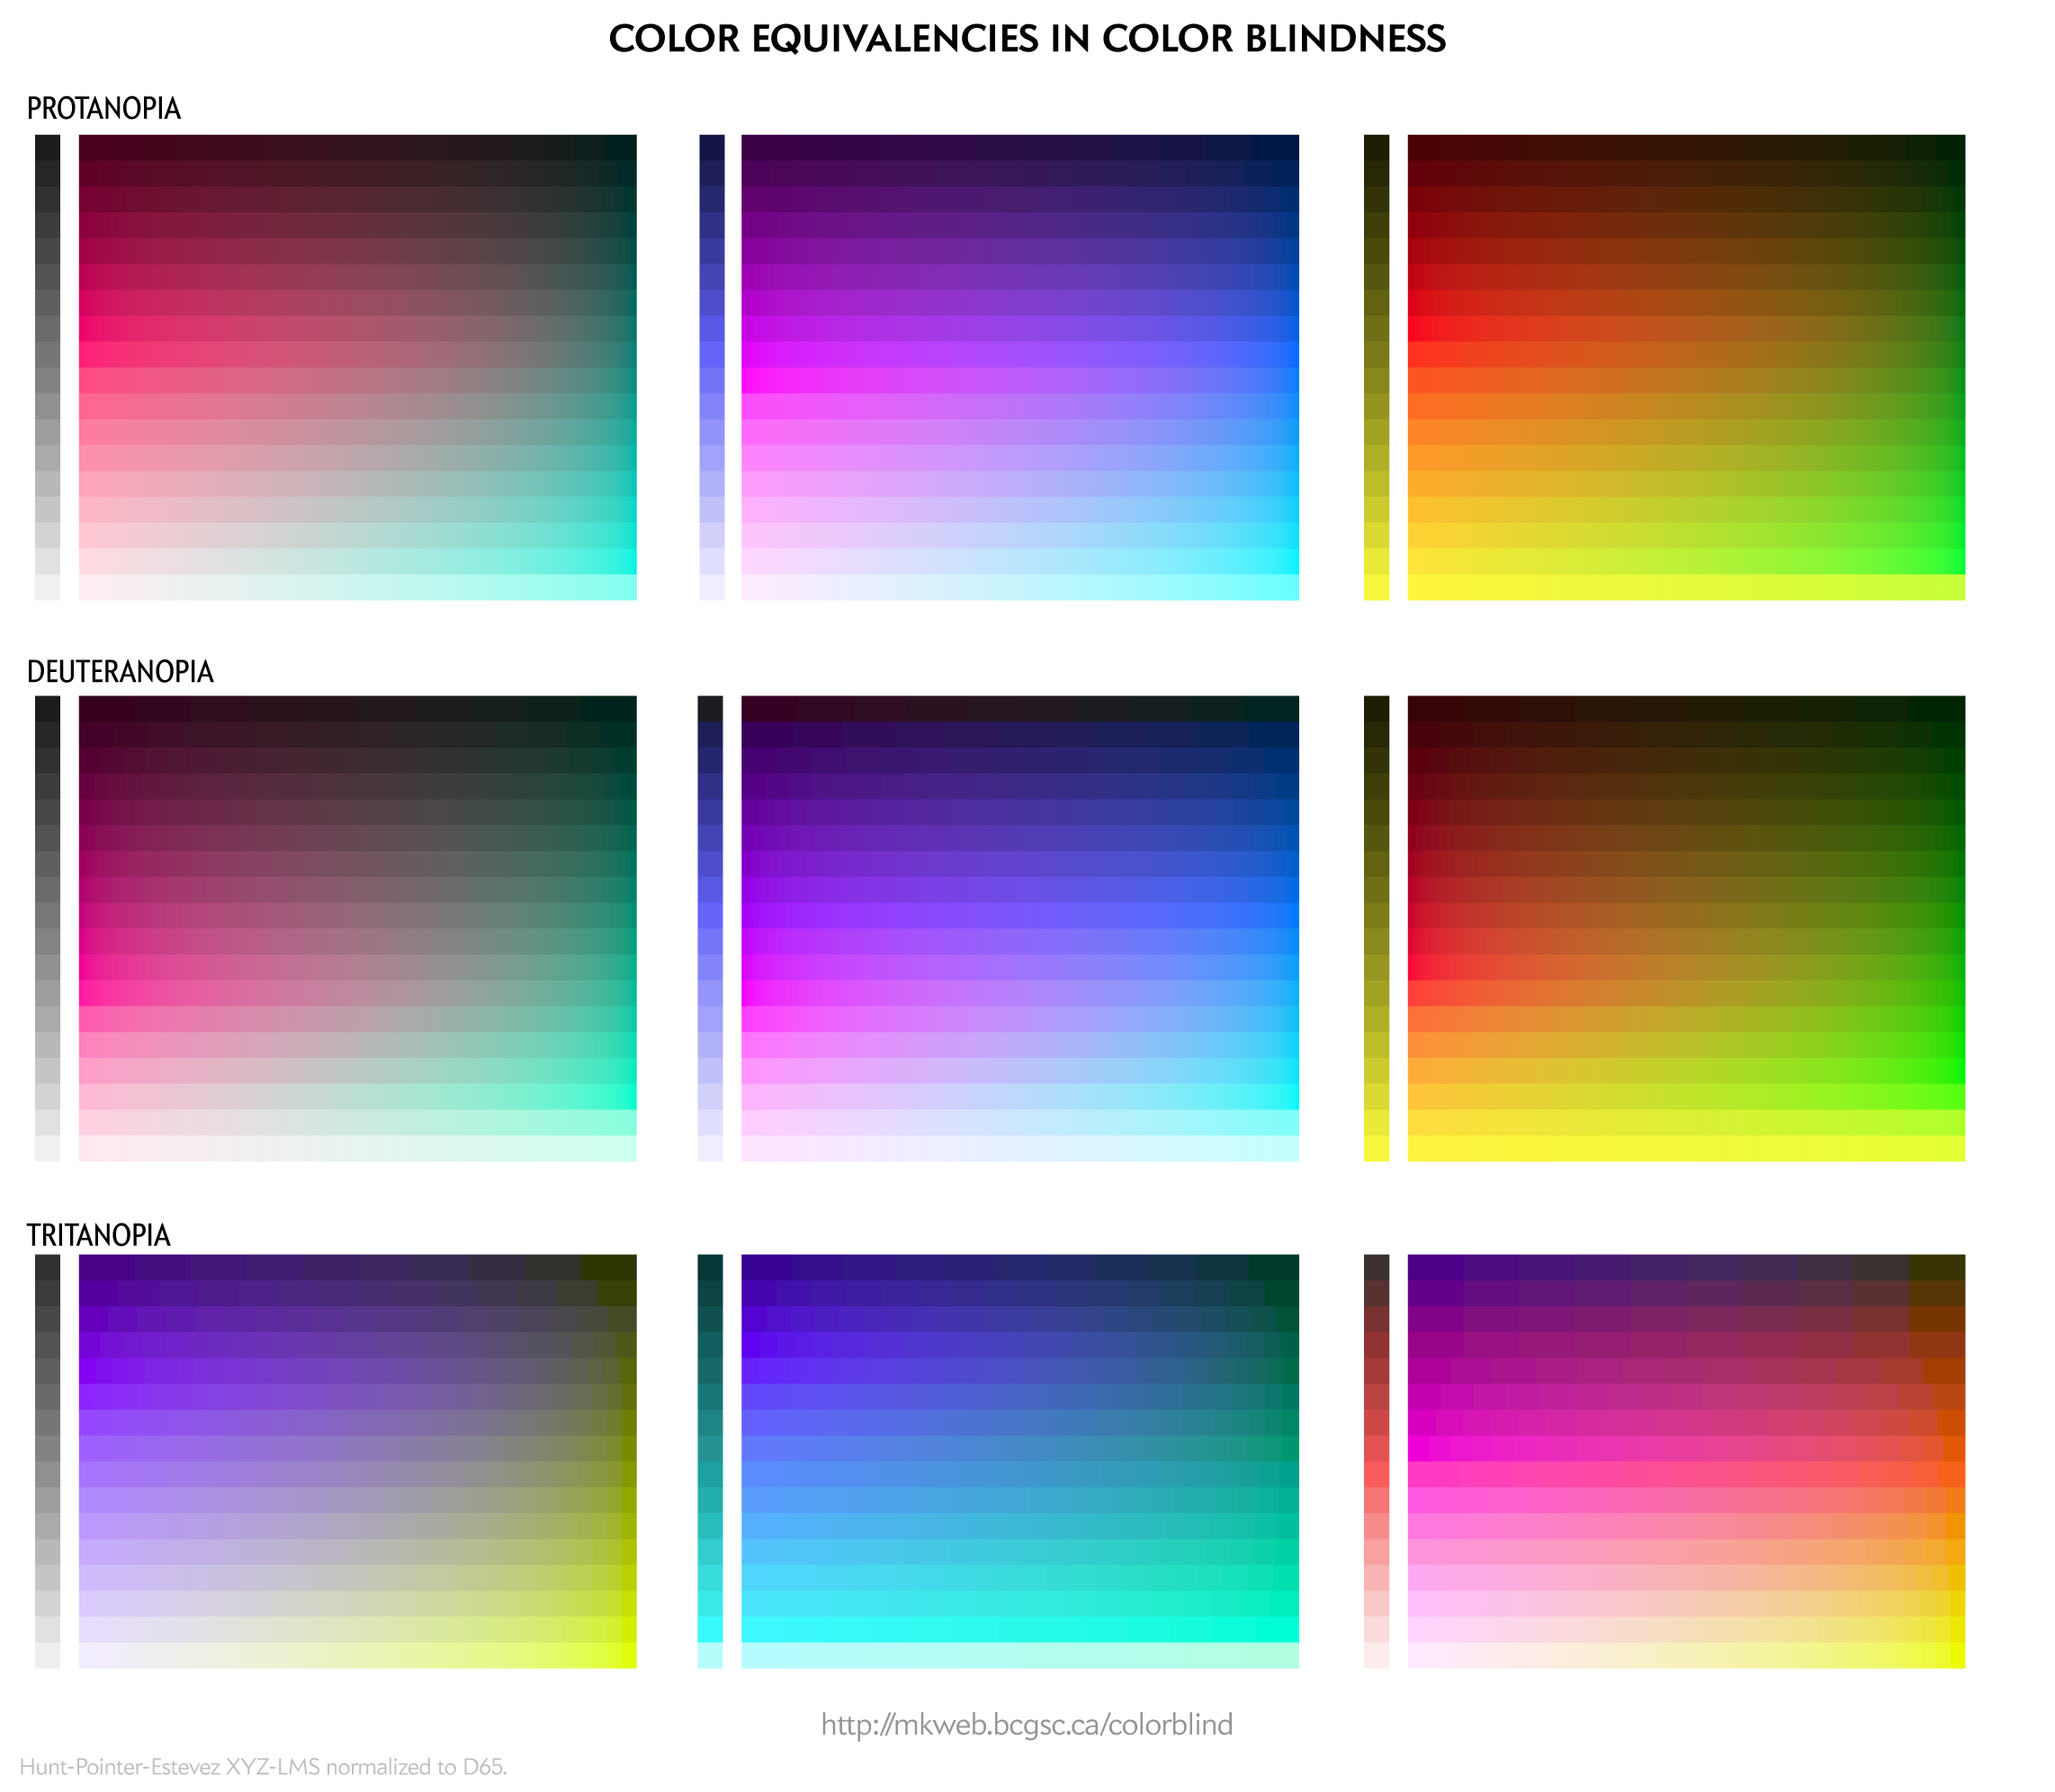 Color palettes and selections for color blindness / Martin Krzywinski @MKrzywinski mkweb.bcgsc.ca